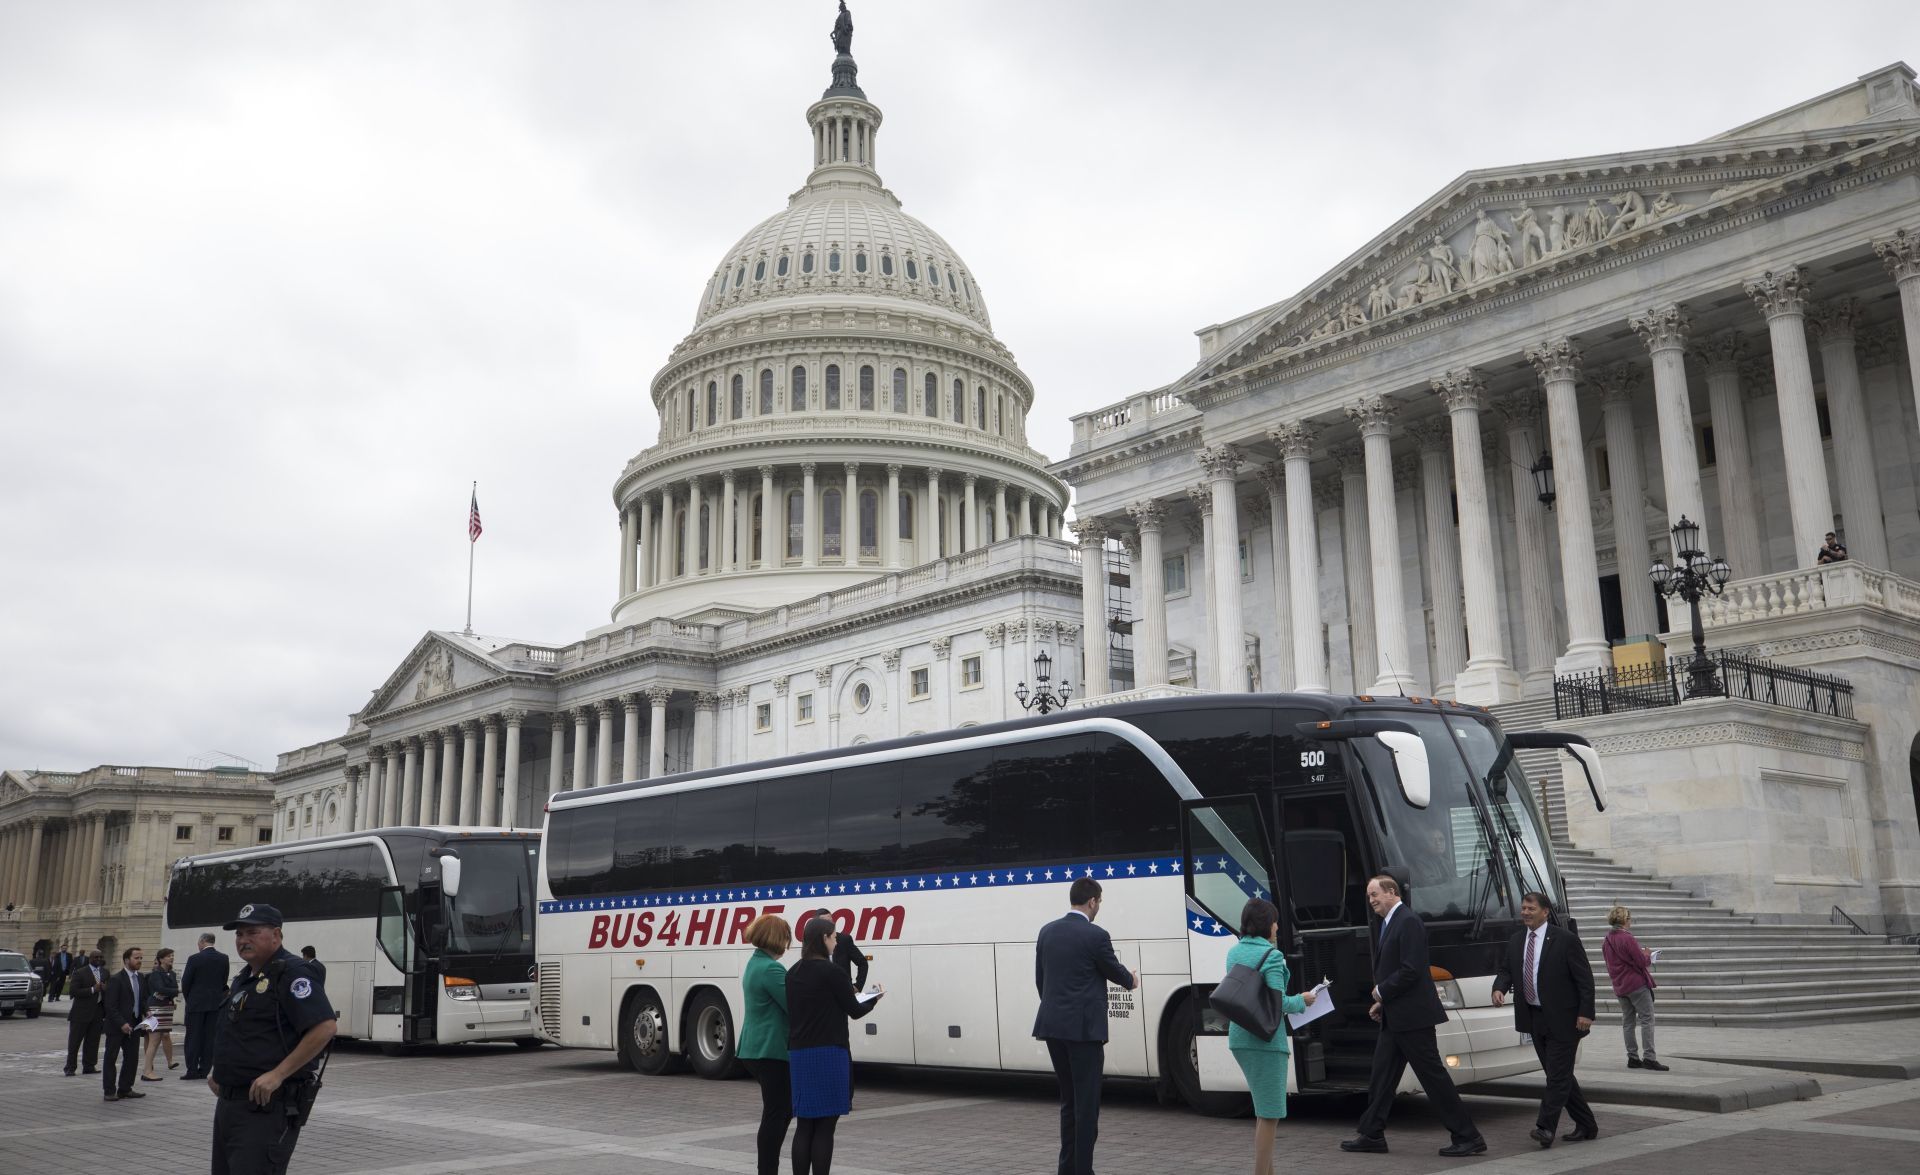 epa05929443 US Senators board busses for the White House for a briefing on North Korea outside the US Capitol in Washington, DC, USA, 26 April 2017. Secretary of State Rex Tillerson, along with Defense Secretary James Mattis, Director of National Intelligence Dan Coats, and Chairman of the Joint Chiefs of Staff General Joseph Dunford, are delivering the briefing.  EPA/JIM LO SCALZO